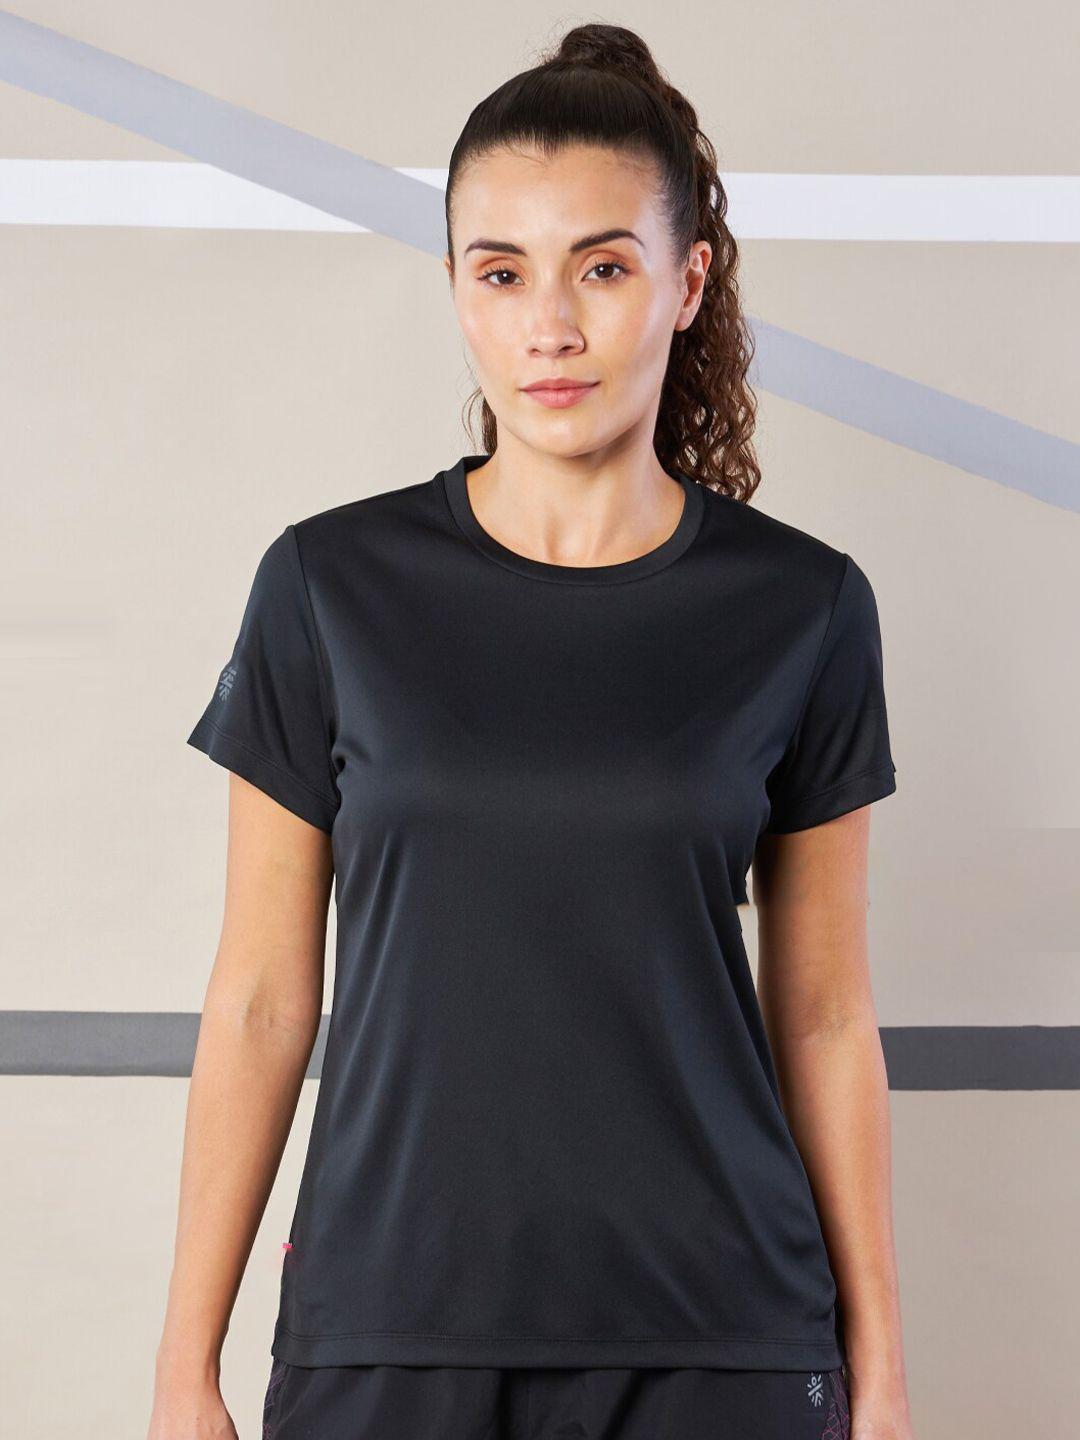 cultsport-do-it-all-performance-dry-fit-round-neck-sports-t-shirt